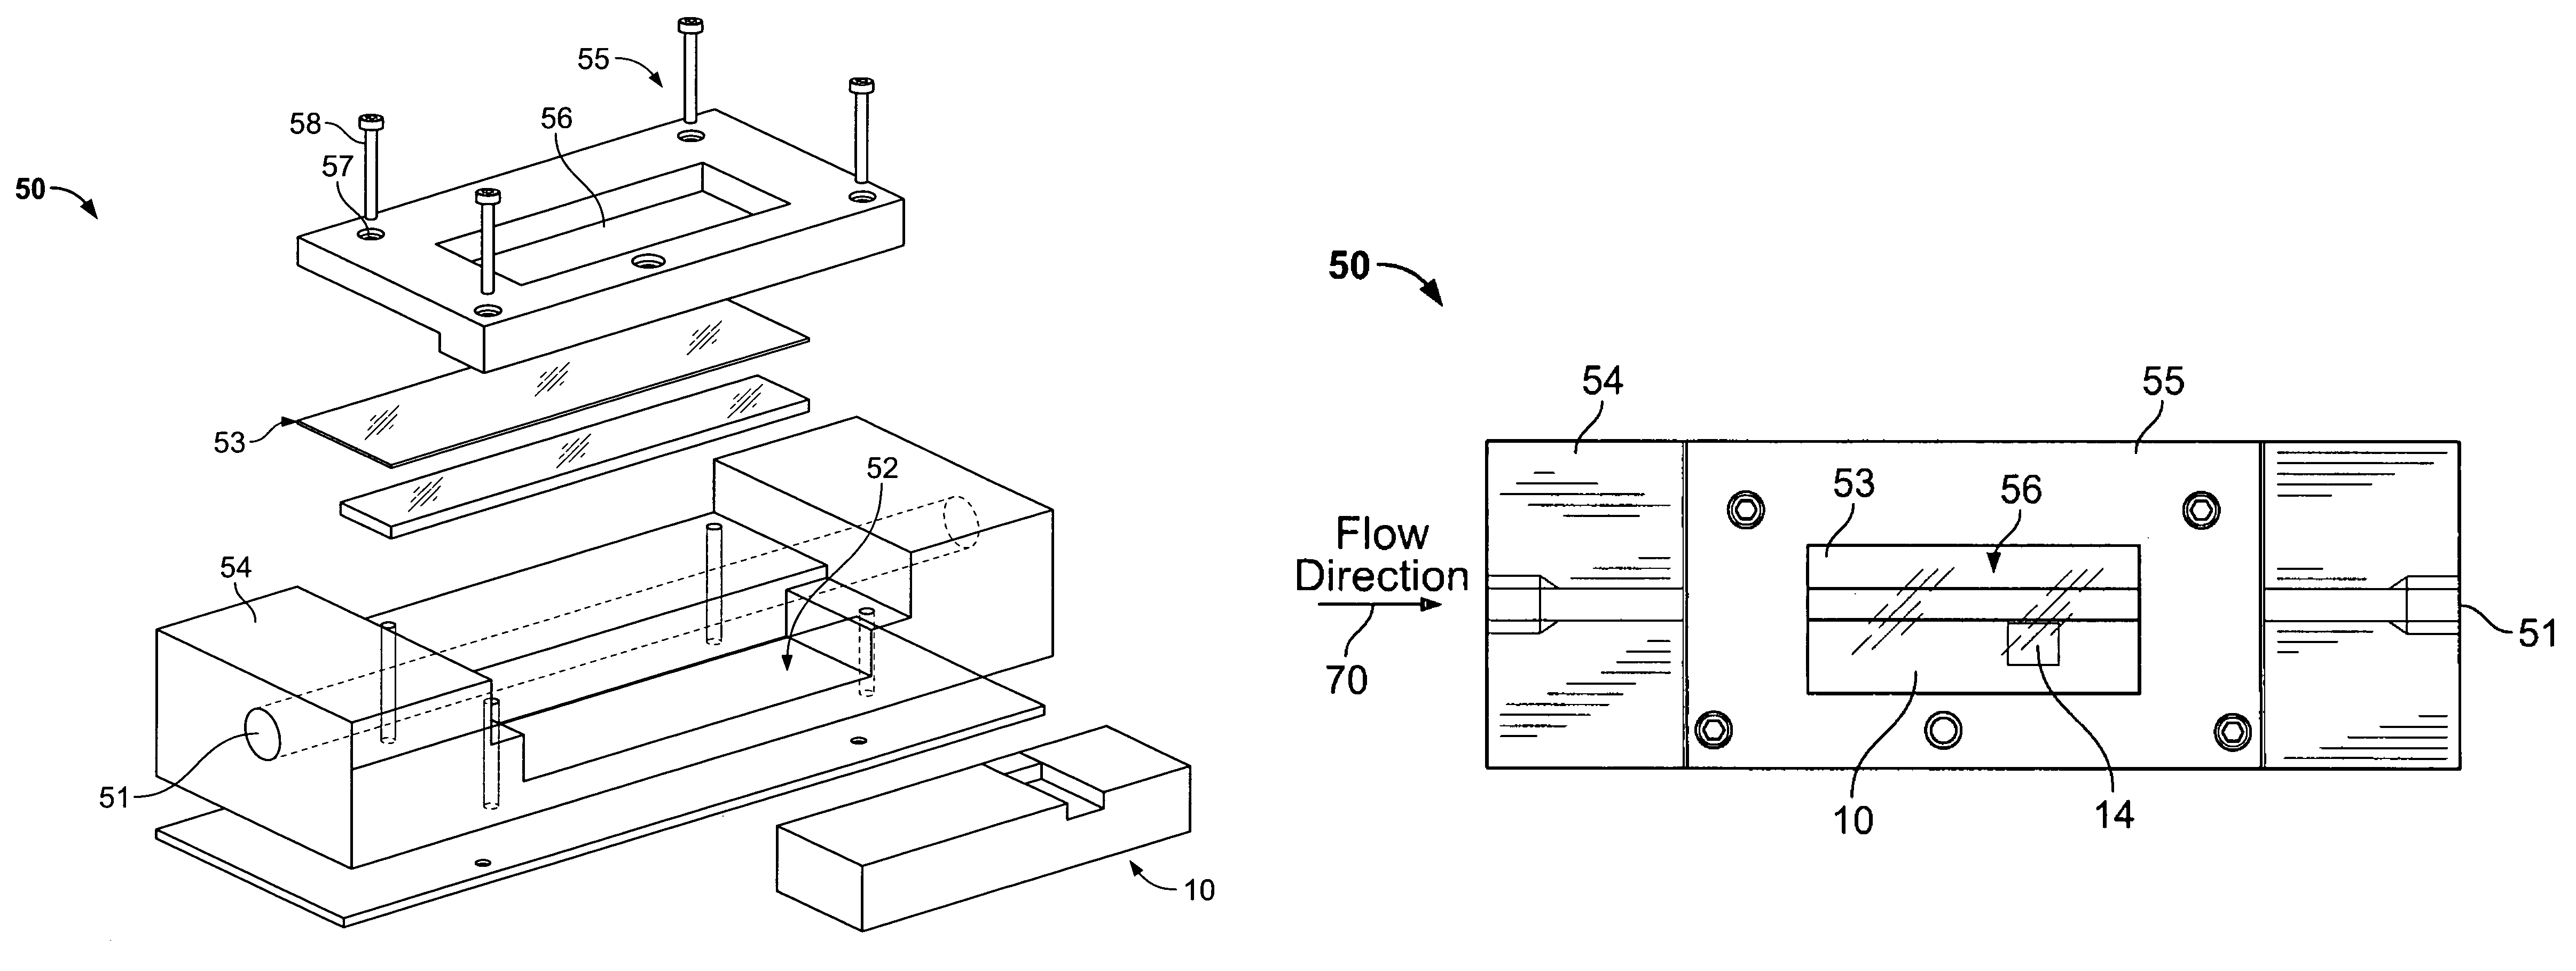 Flow-through apparatus for microscopic investigation of dissolution of pharmaceutical solids